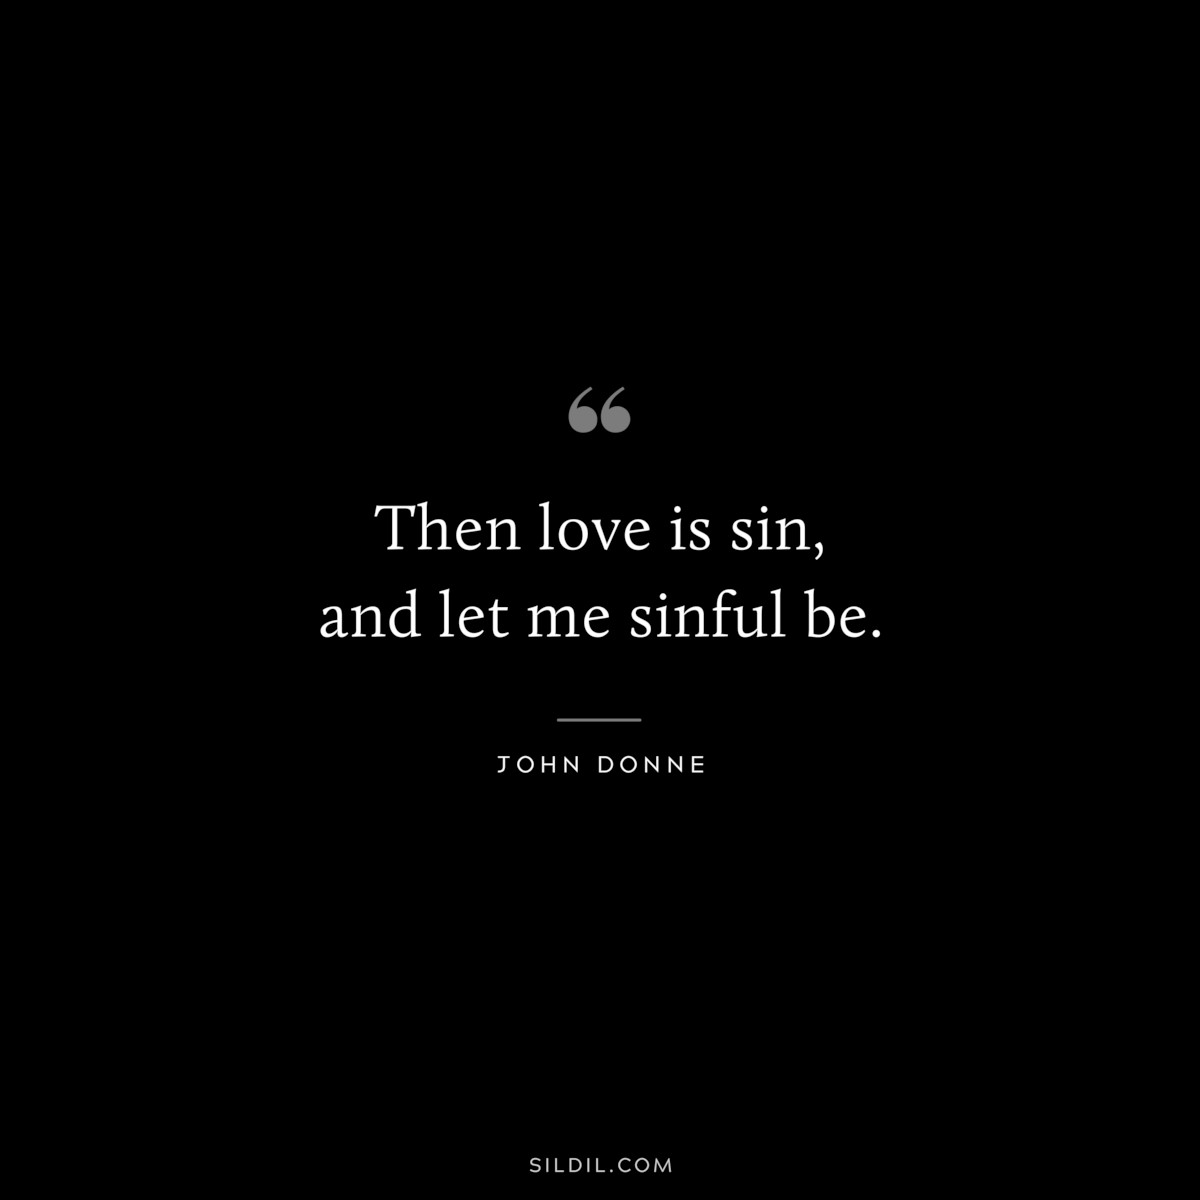 Then love is sin, and let me sinful be. ― John Donne